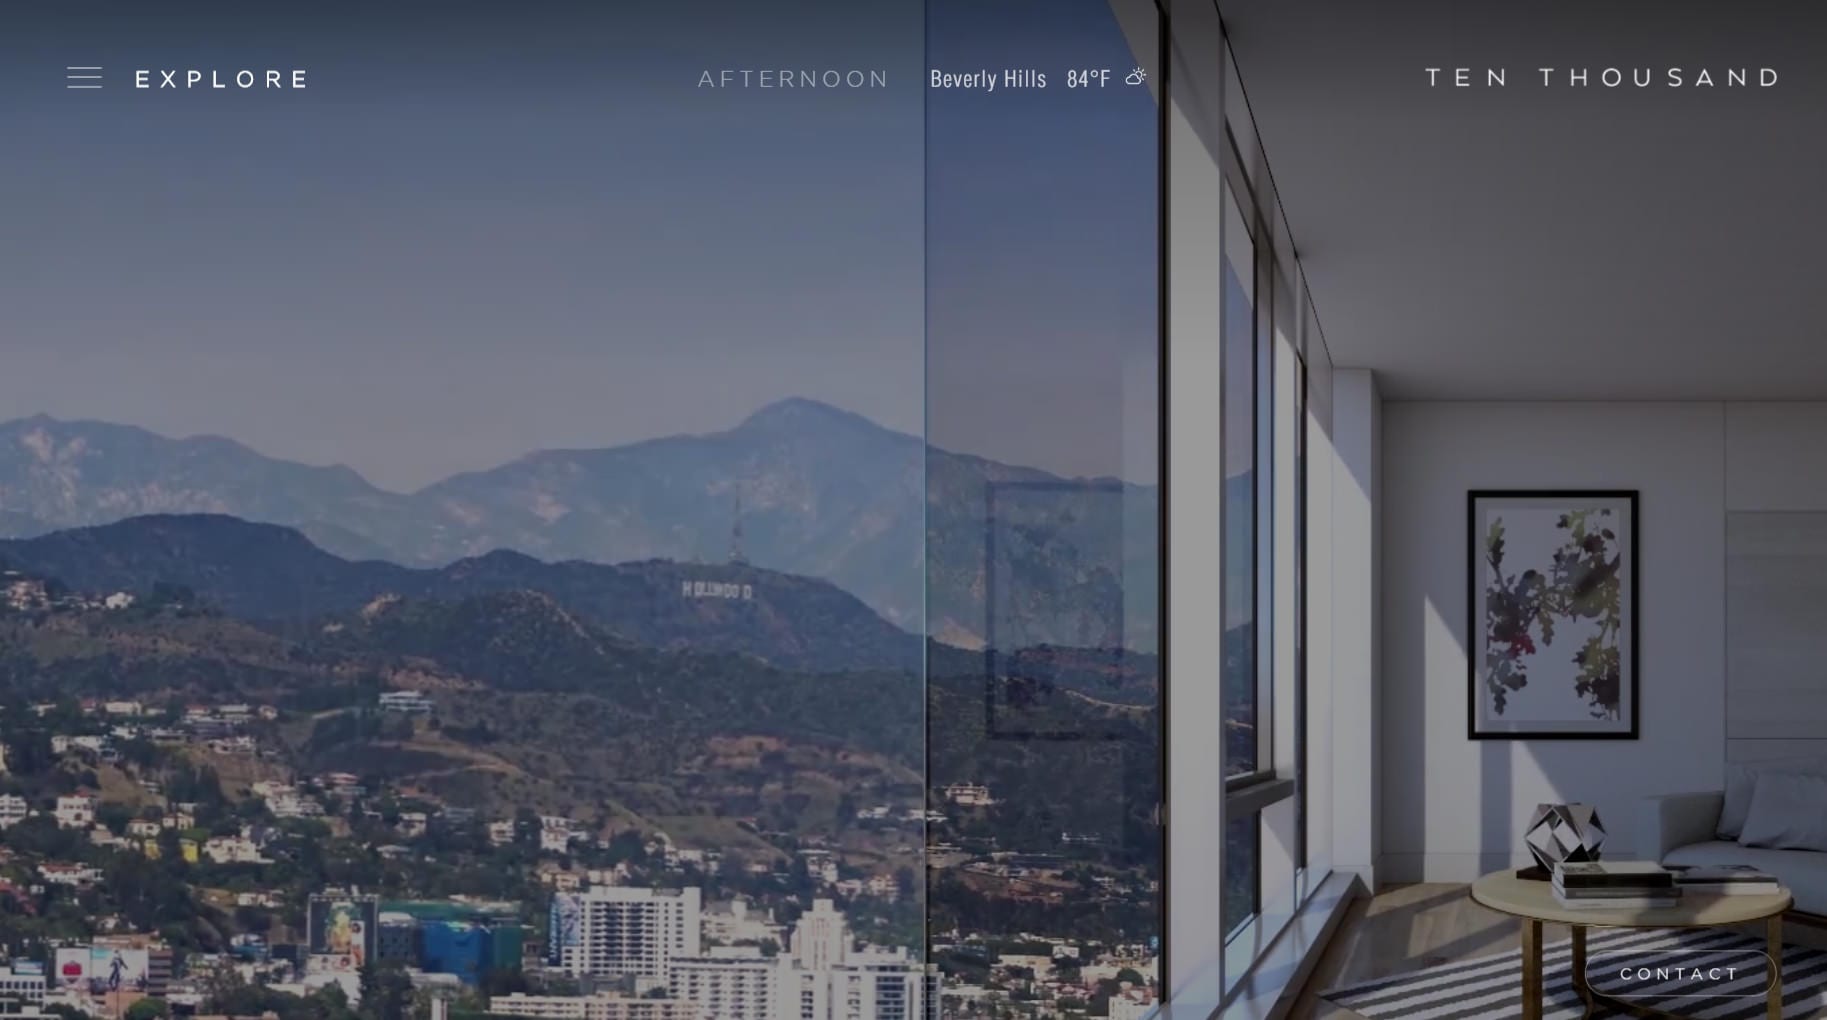 Screen Capture: Ten Thousand landing page with a view of an apartment overlooking the Hollywood sign